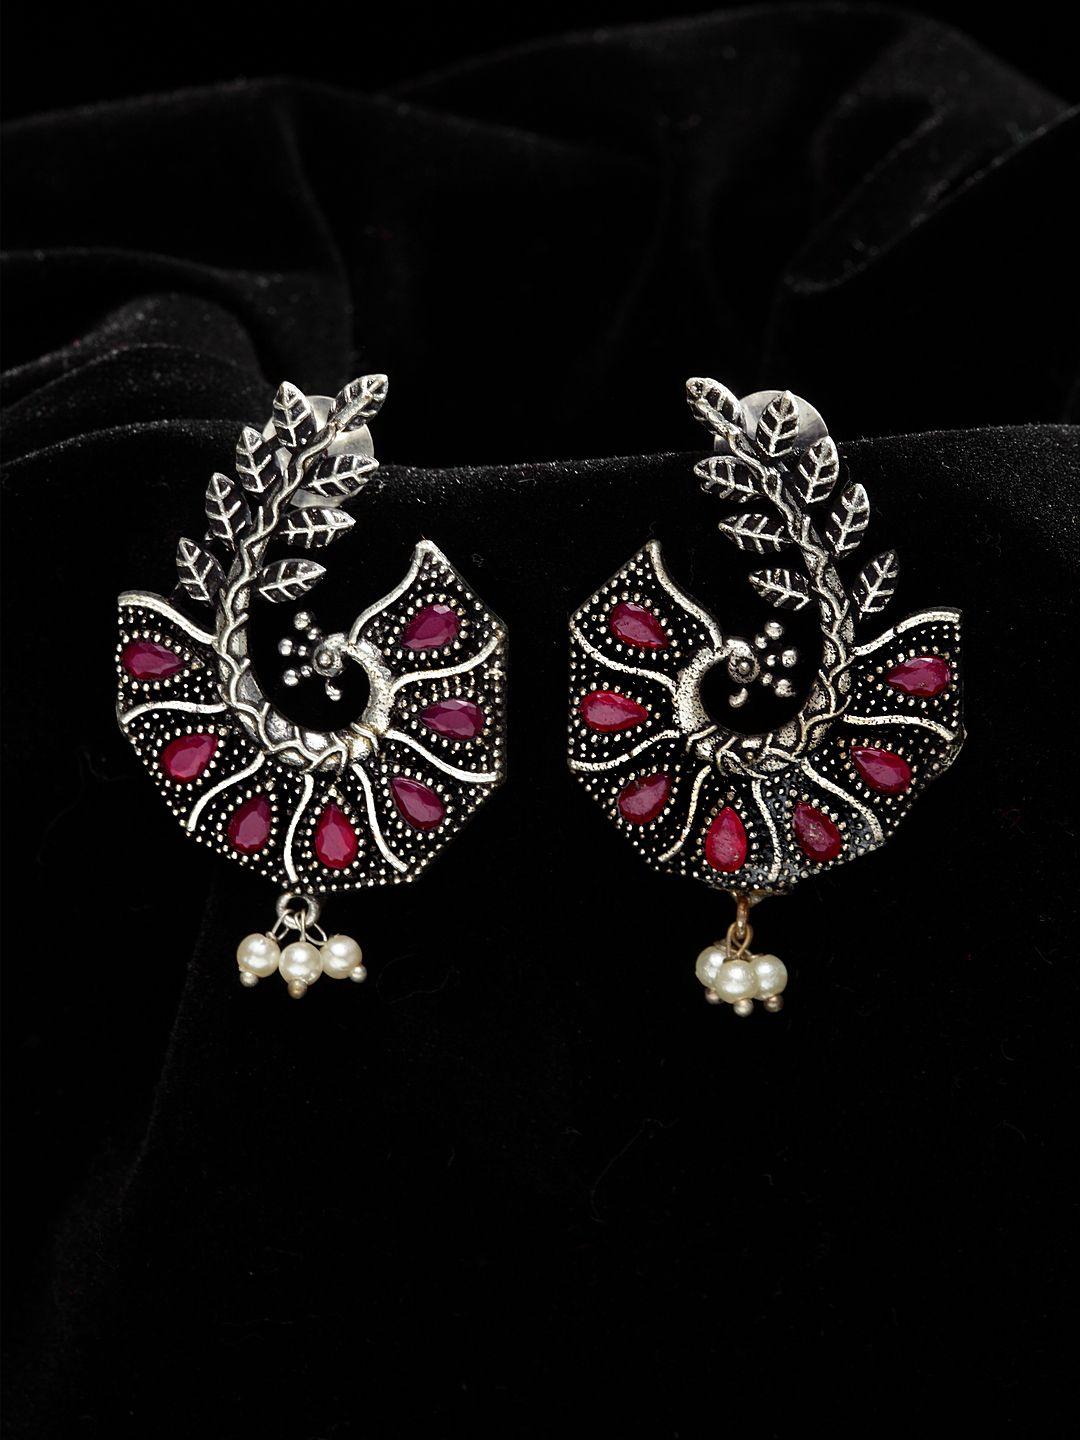 panash silver-plated & pink peacock shaped drop earrings